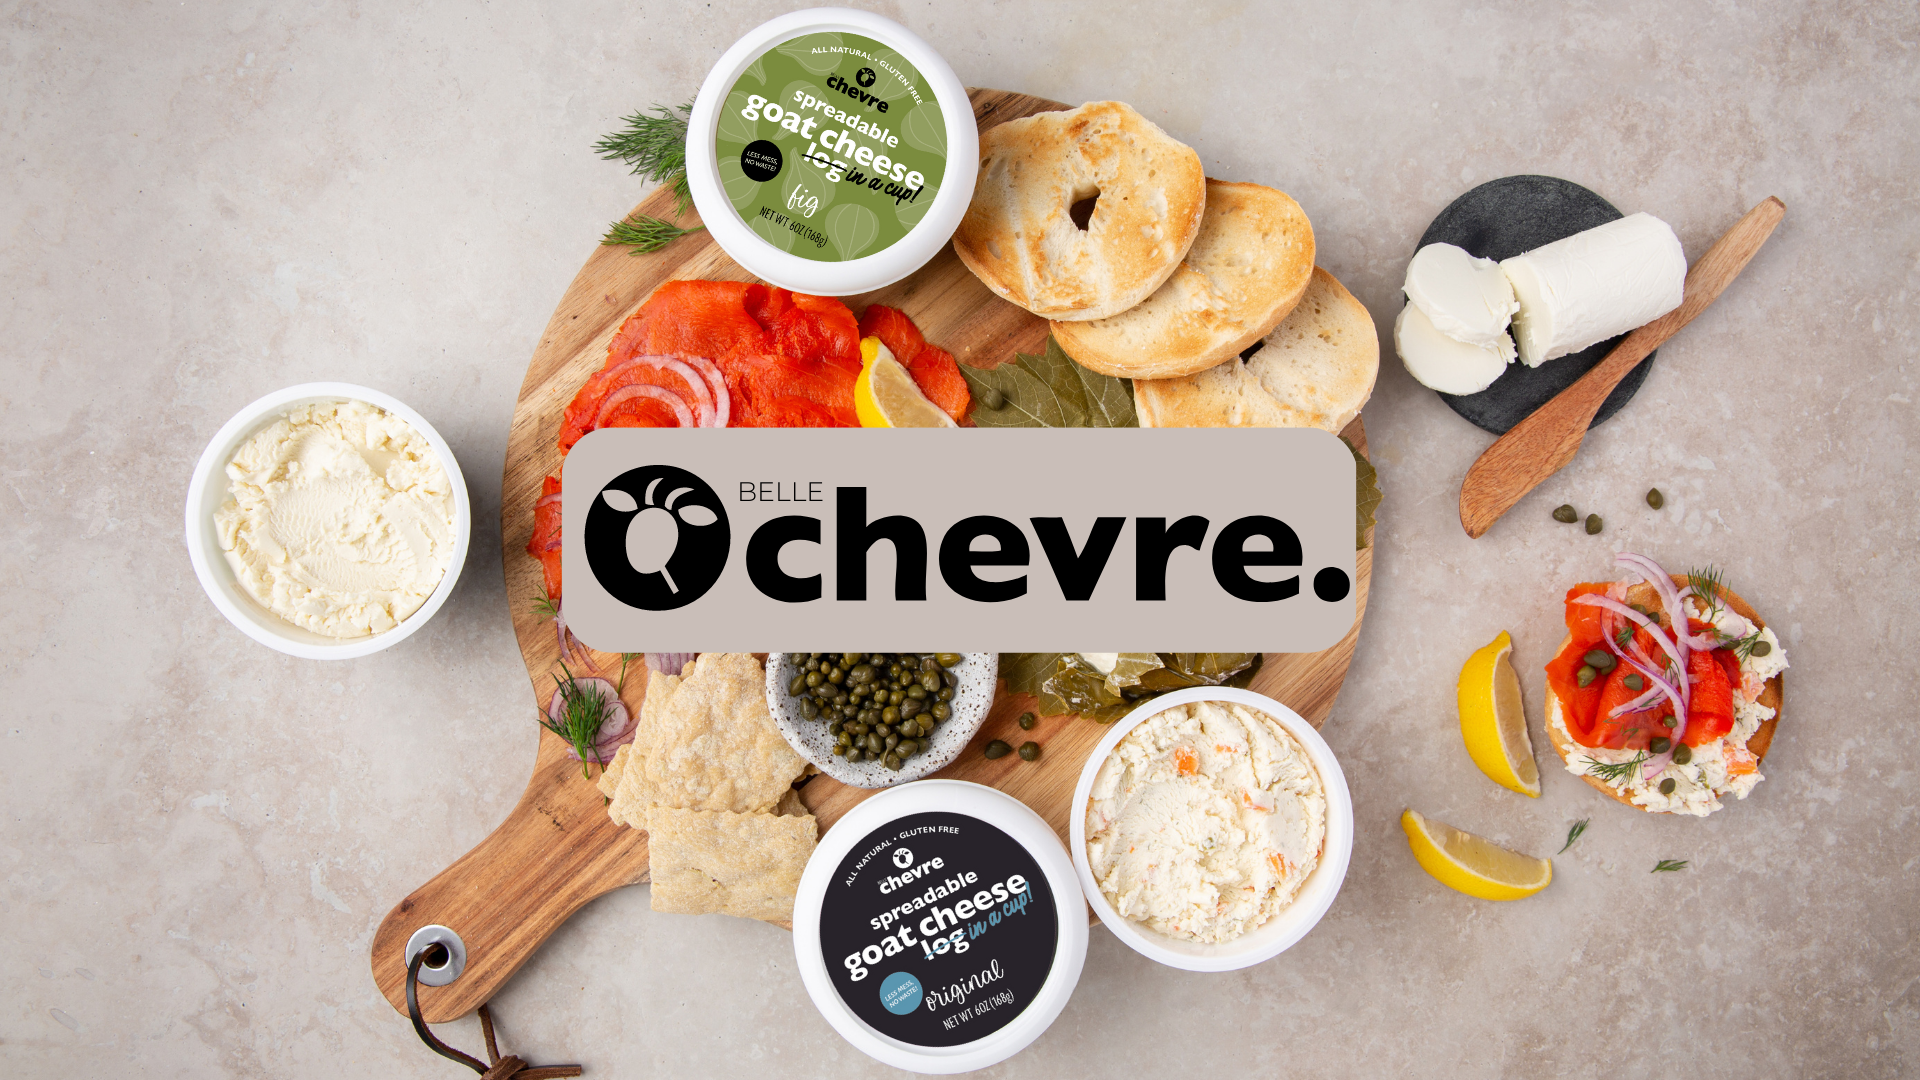 Belle Chevre Artisinal Goat Cheeses & Goat Cheese Spreads